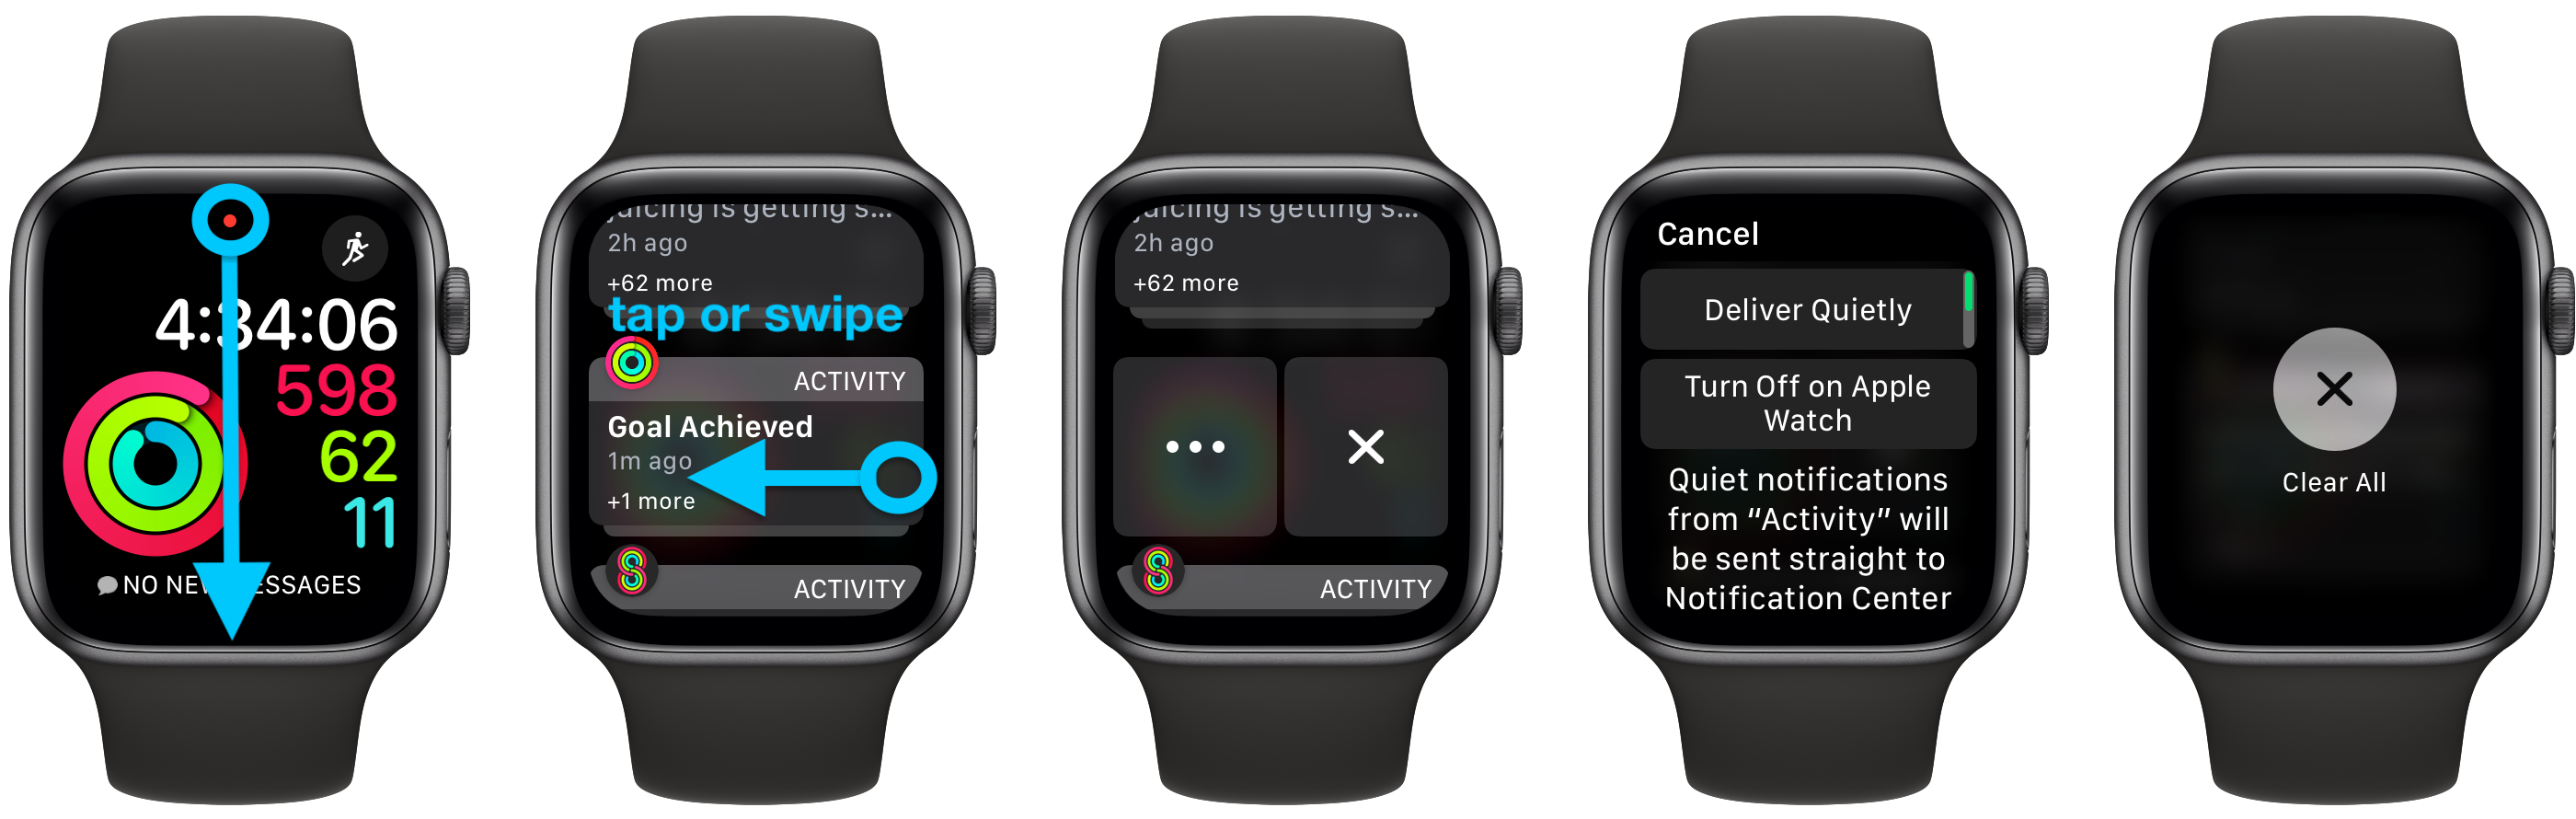 Apple Watch How to see notifications, customize, more 9to5Mac